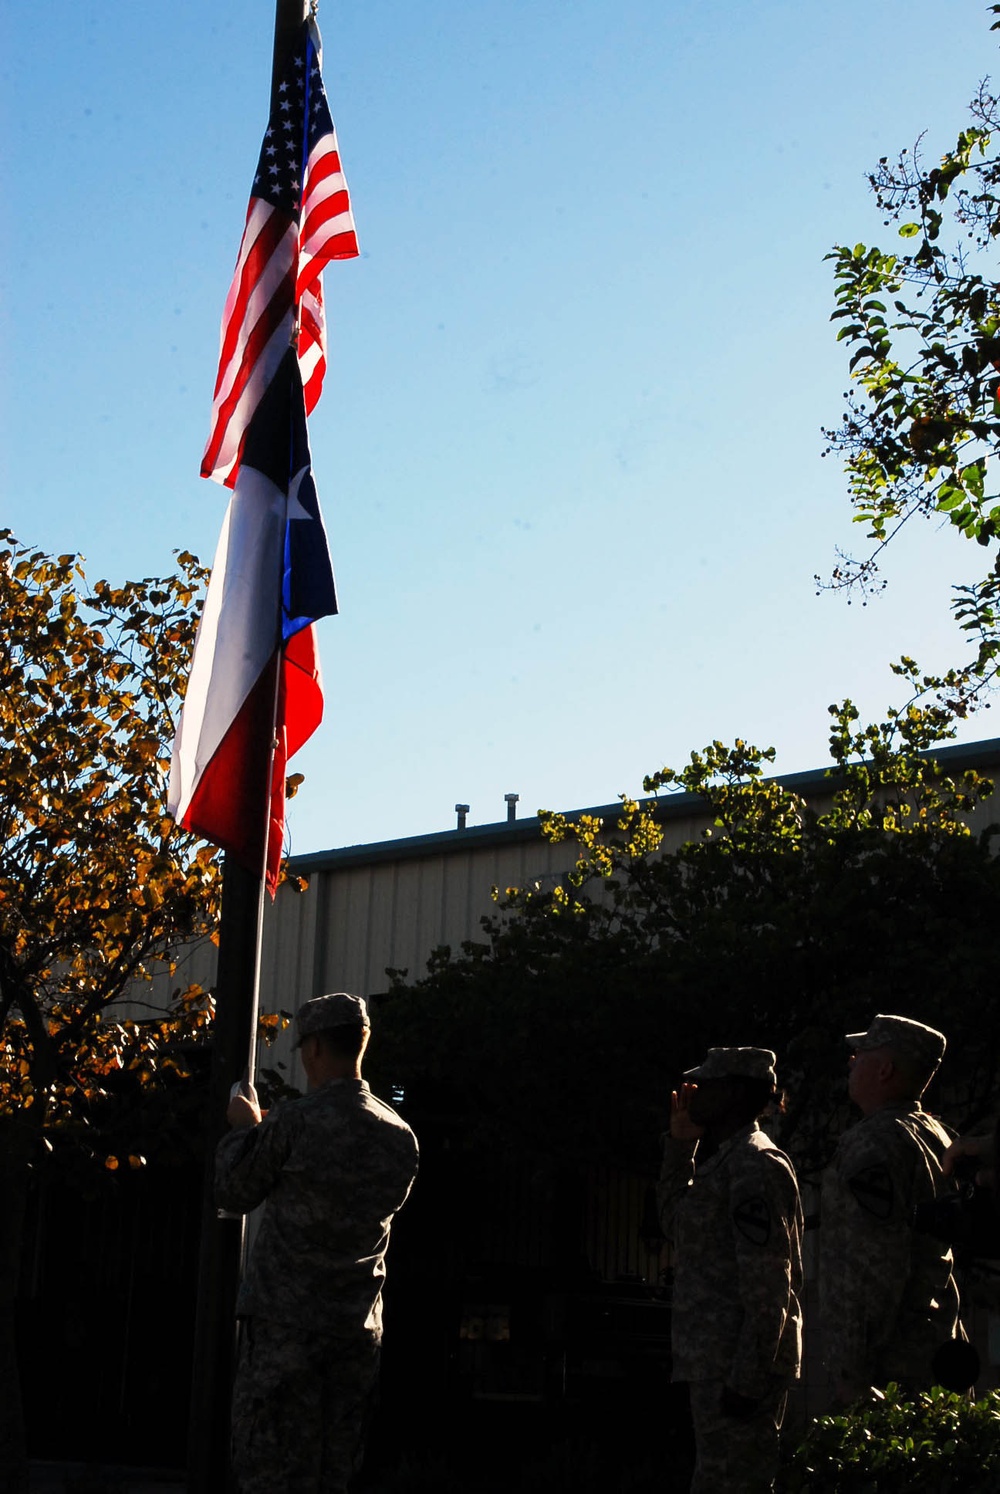 Ironhorse soldiers, fire fighters dedicate flagpole on 9/11